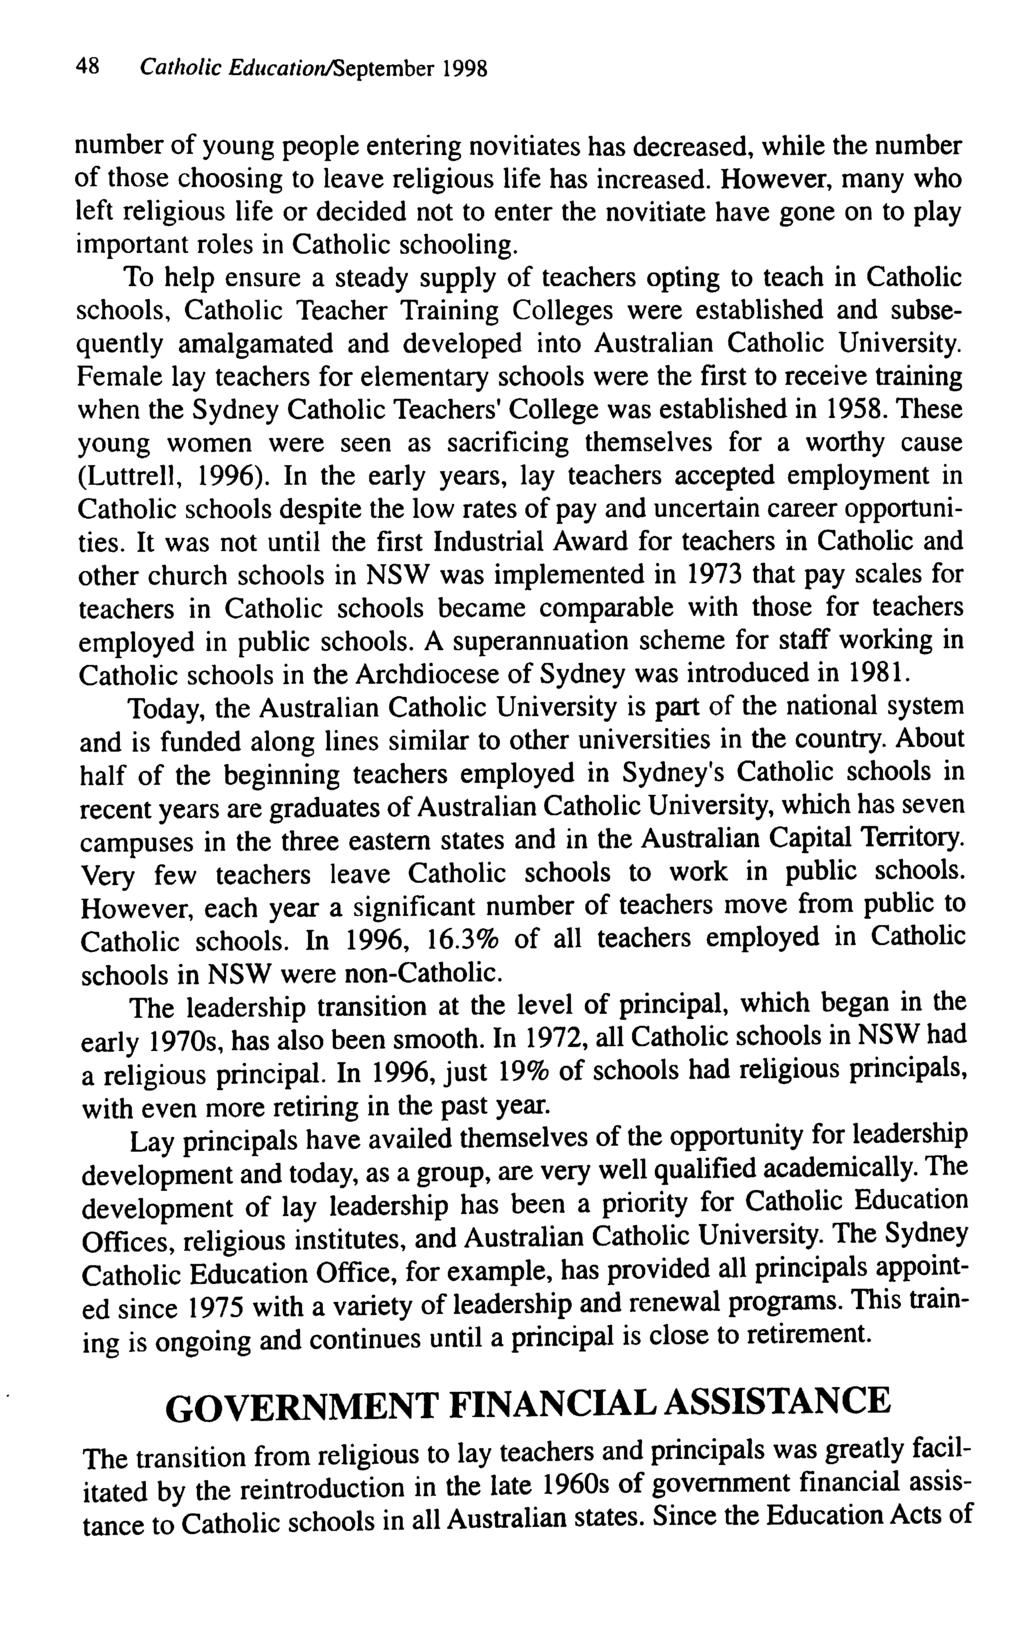 48 Catholic Education/September 1998 number of young people entering novitiates has decreased, while the number of those choosing to leave religious life has increased.